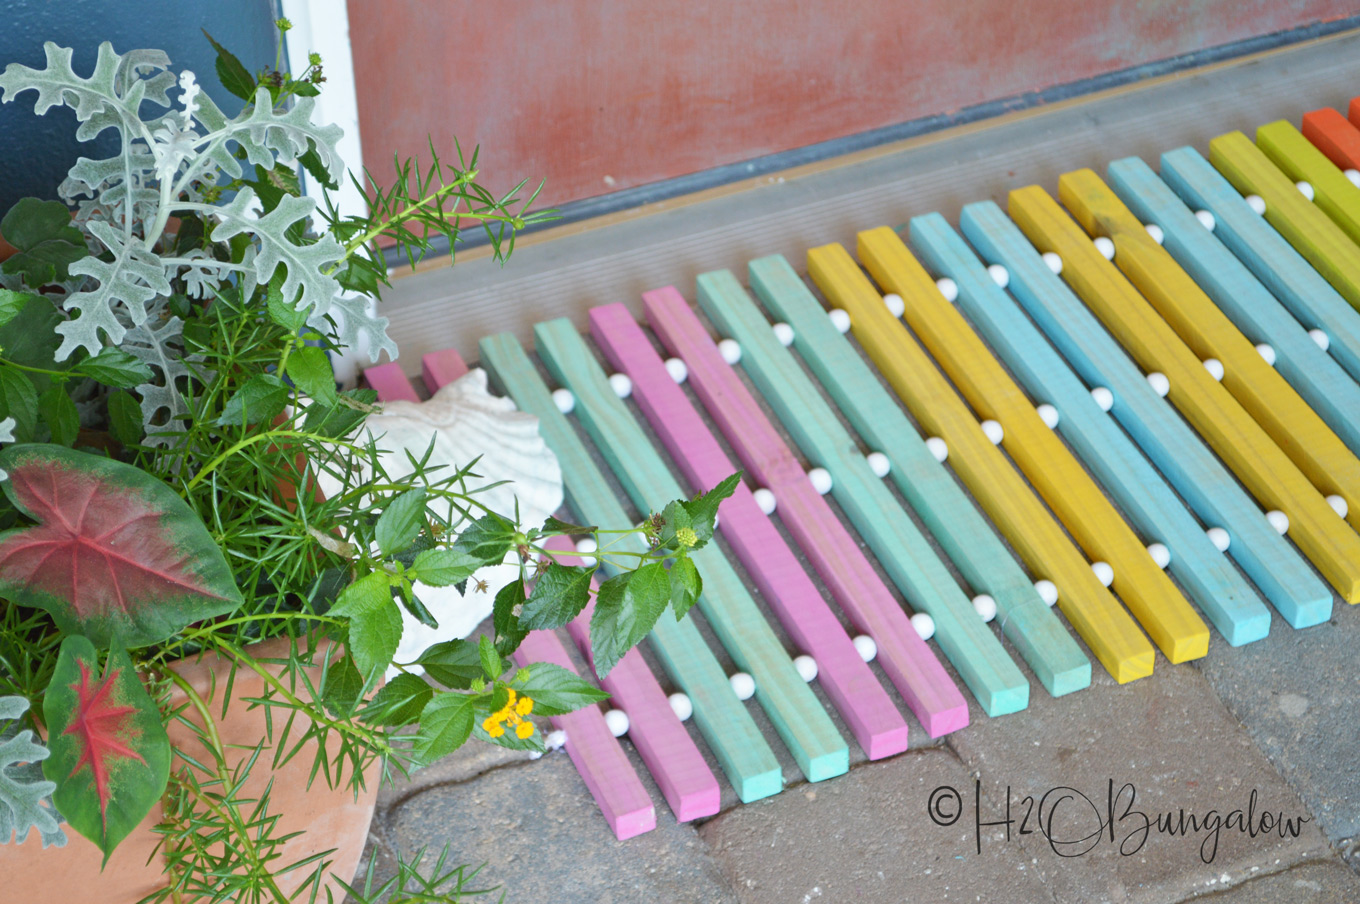 I've got 7 colorful spring outdoor DIY projects with tutorials to share with you today.  I love spring home decor projects, they brighten dark corners and remind us of pretty flowers blooming, warmer weather ahead. Add one of these to freshen up your outdoor space and be ready for spring and warmer weather ahead.